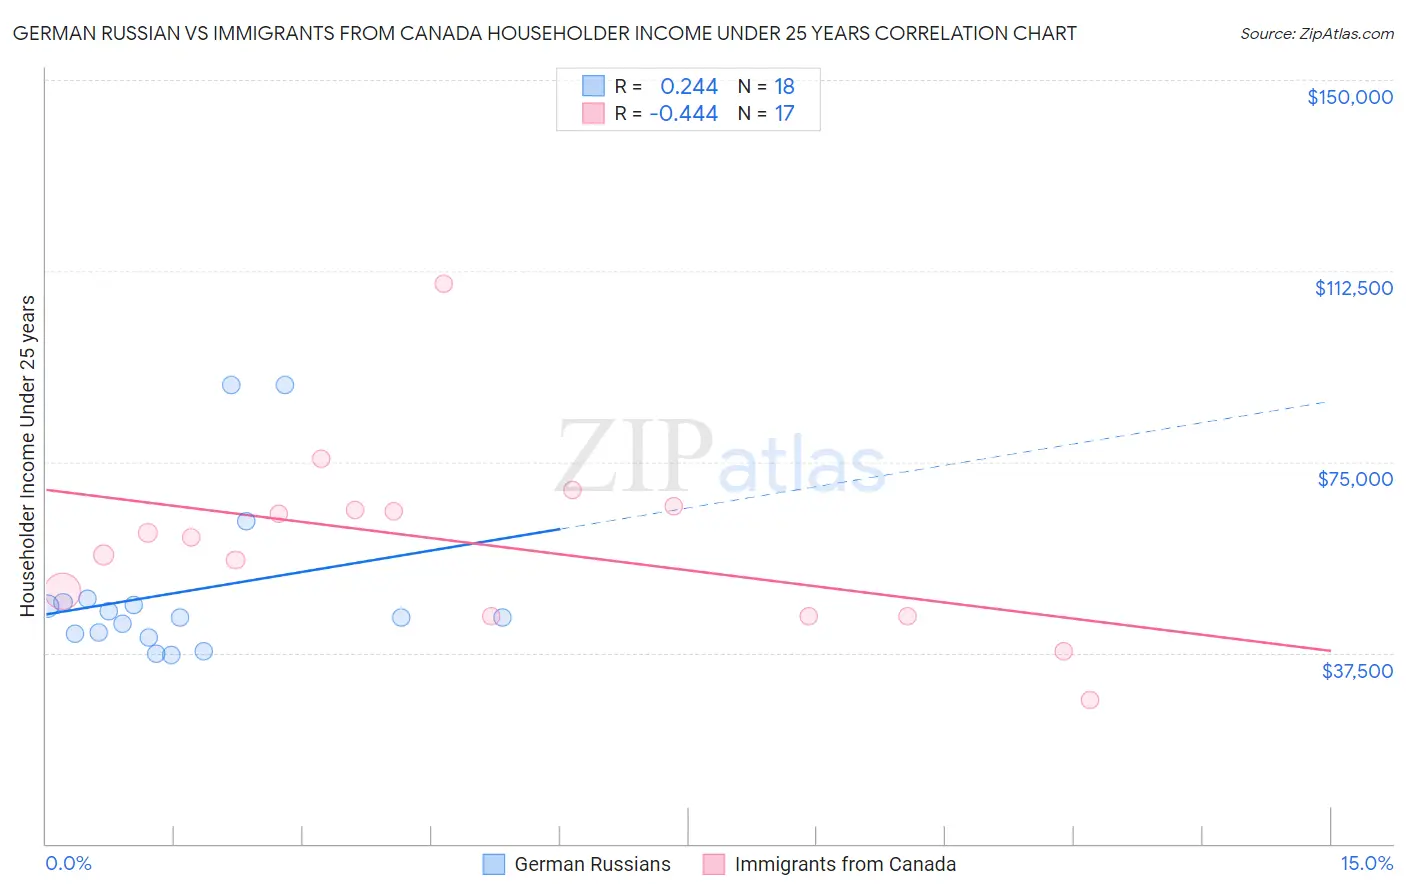 German Russian vs Immigrants from Canada Householder Income Under 25 years